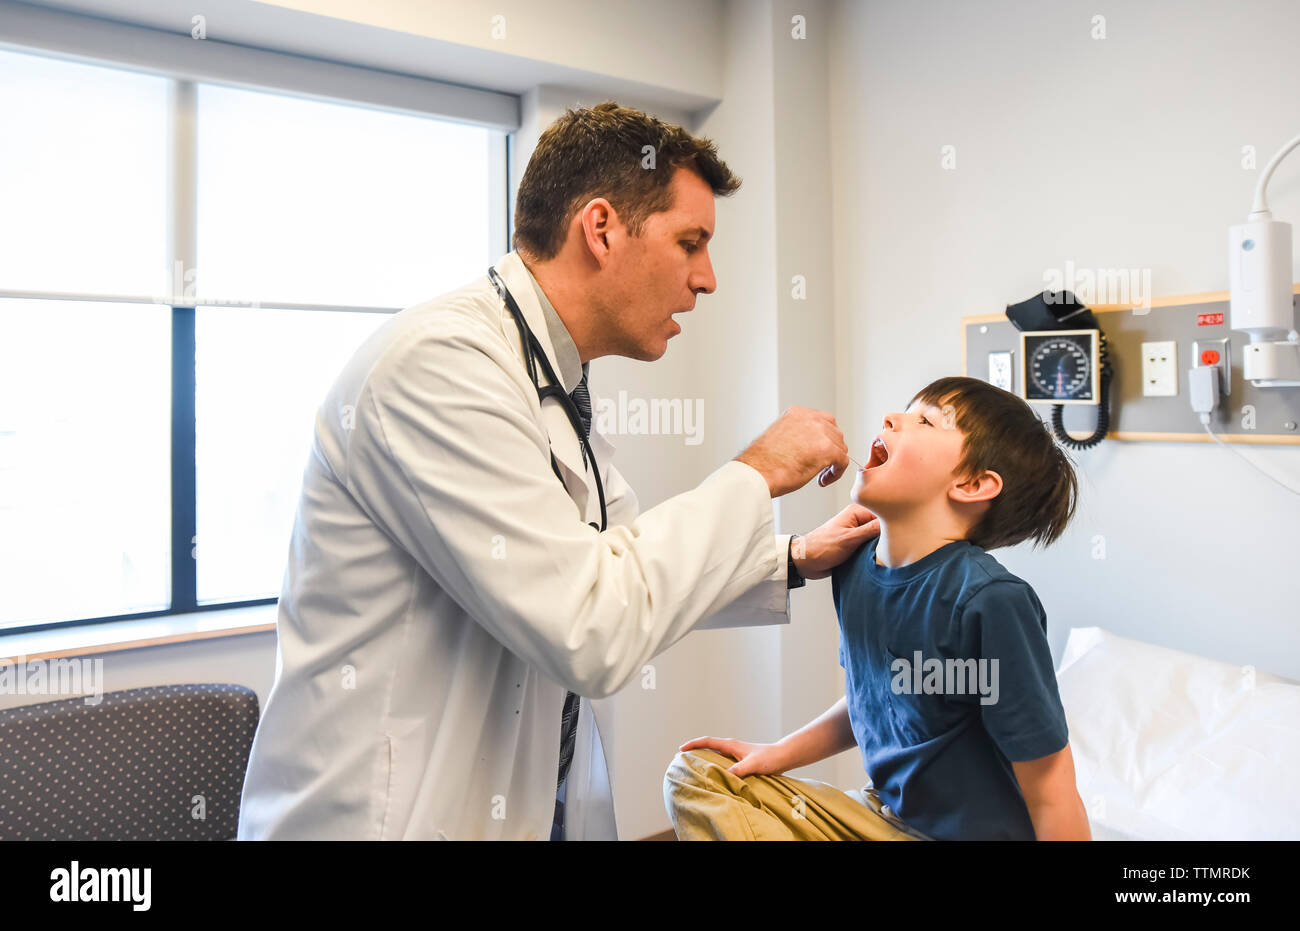 Doctor looking in the mouth of a young patient on exam table. Stock Photo